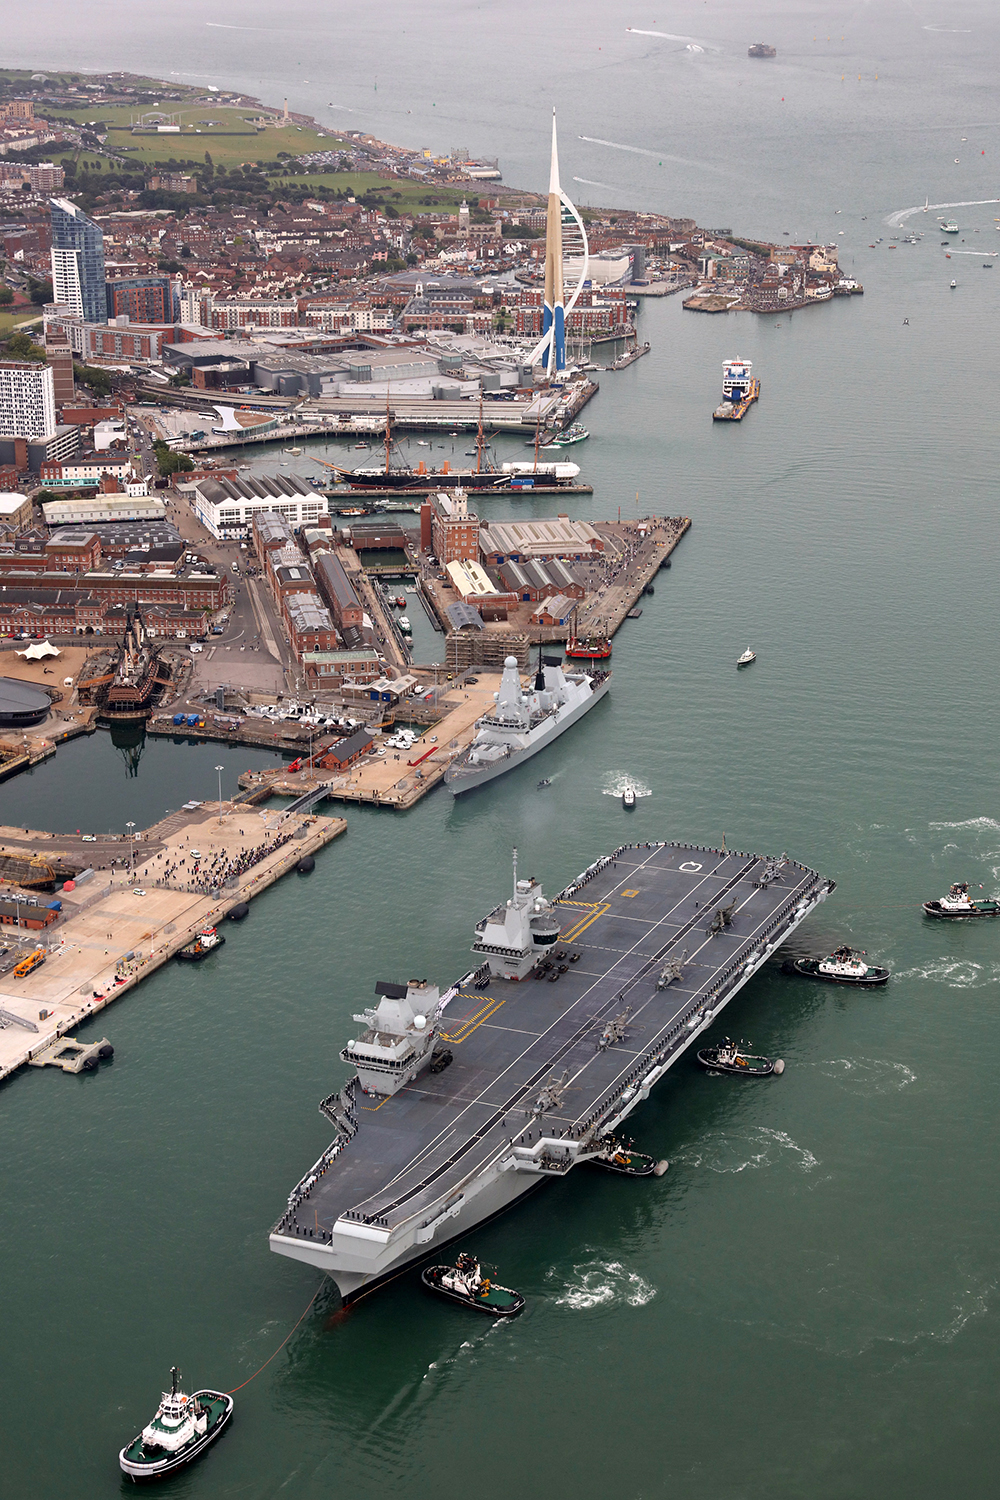 HMS Queen Elizabeth sails into her home port of Portsmouth for the first time, design and engineering by Tex Special Projects.